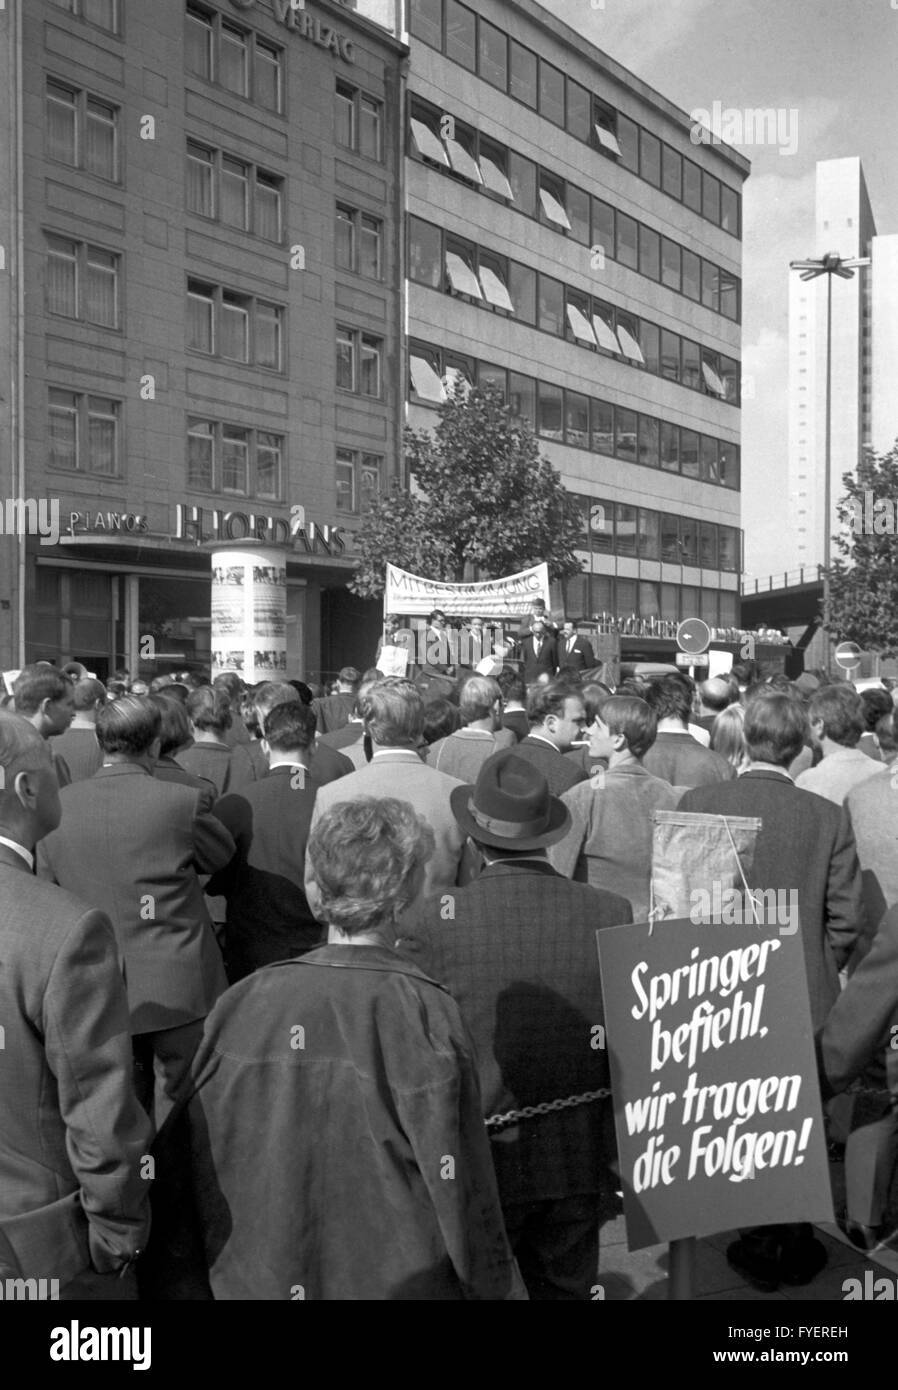 Several hundred people demonstrate against the cessation of the boulevard magazine 'Mittag' and the loss of 180 jobs in Duesseldorf on 23 September 1967. Stock Photo